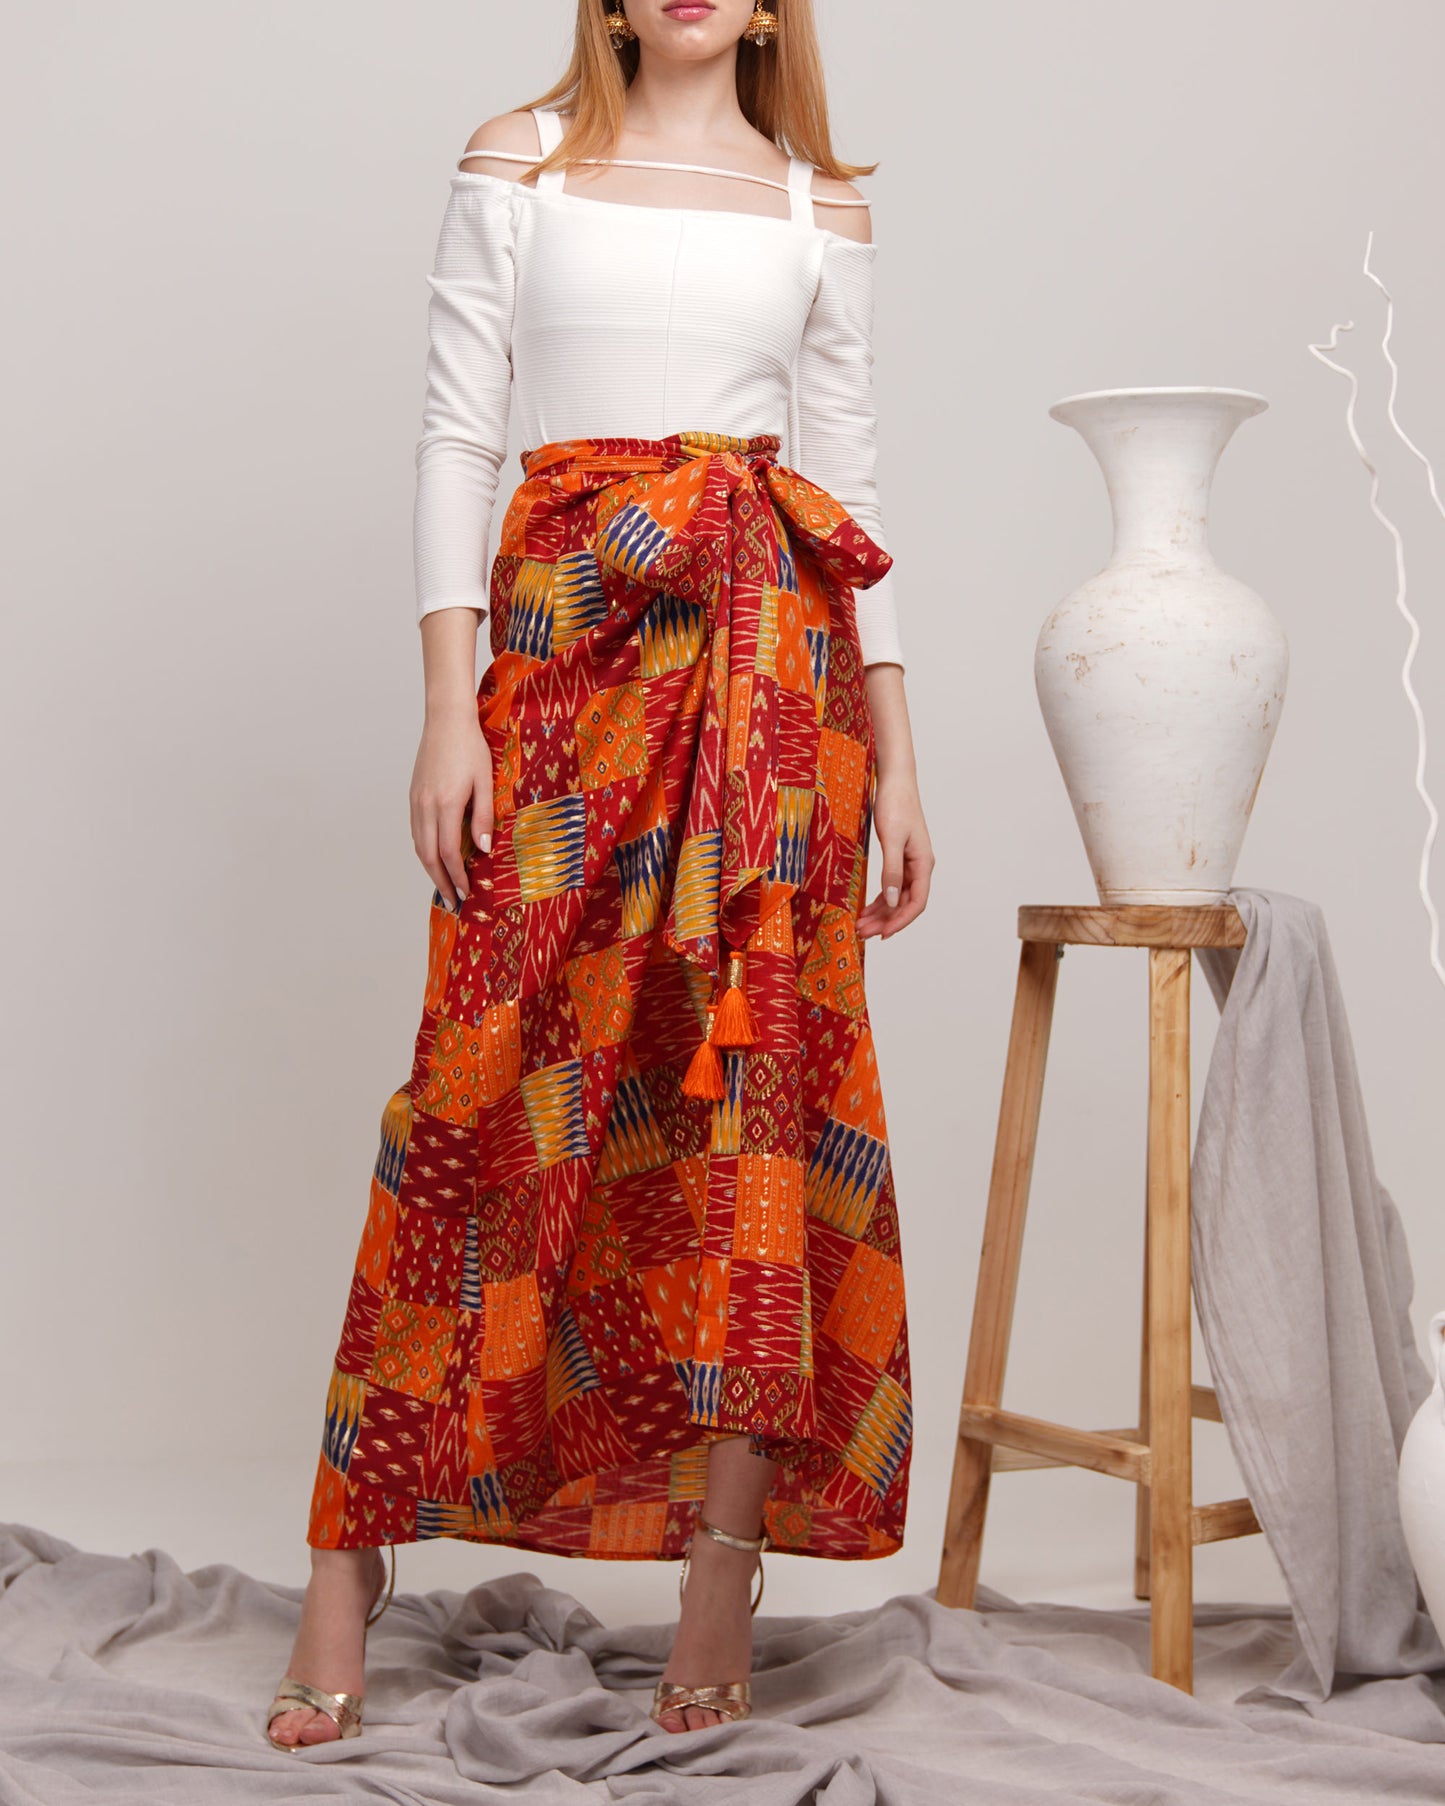 Flaming red wrap skirt and off white top set